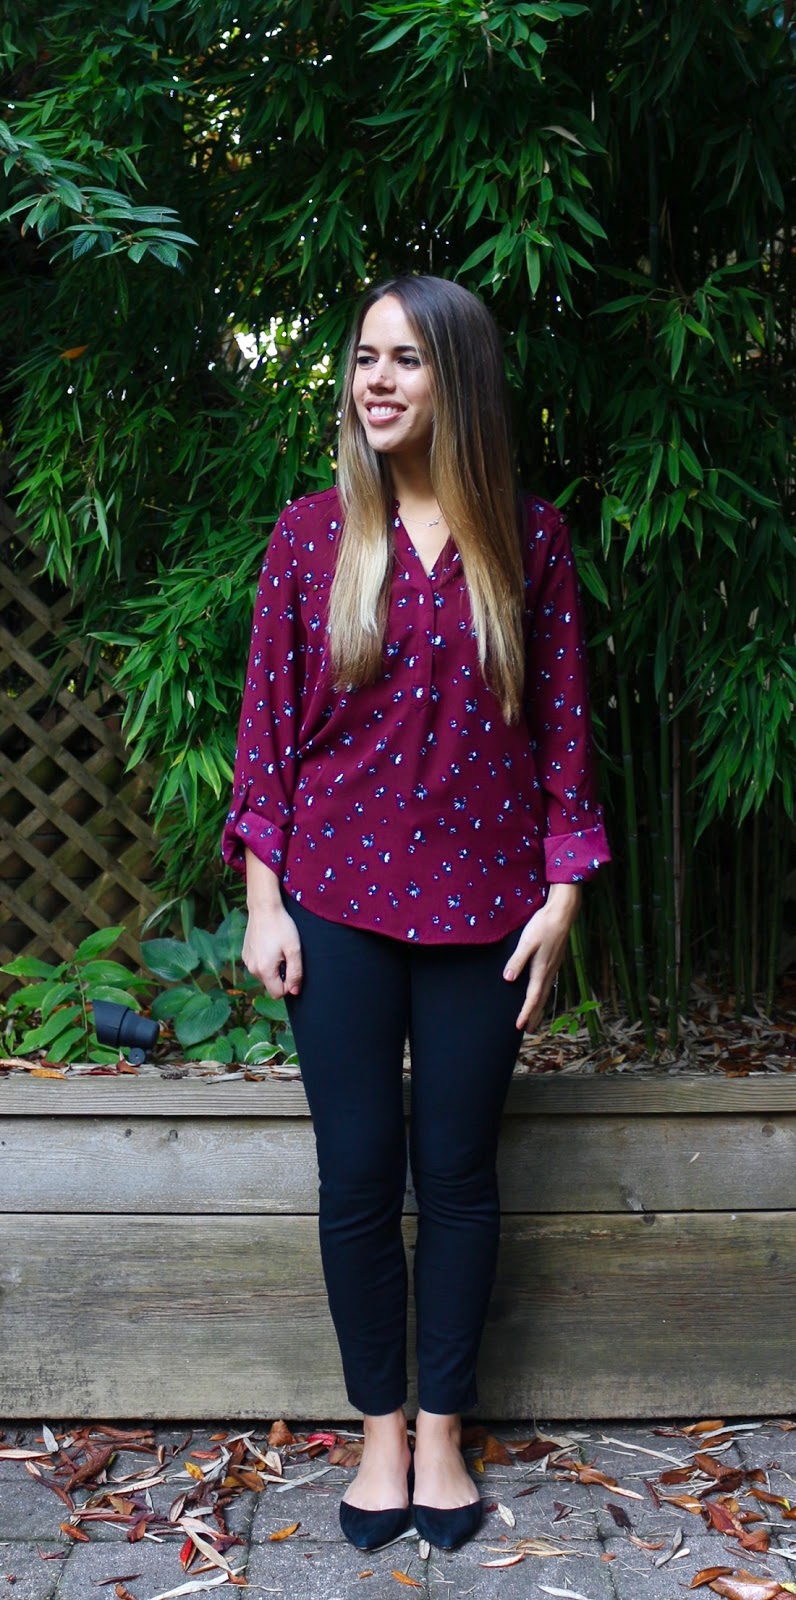 Jules in Flats - Burgundy Blouse with Black Pants (Business Casual Fall Workwear on a Budget)